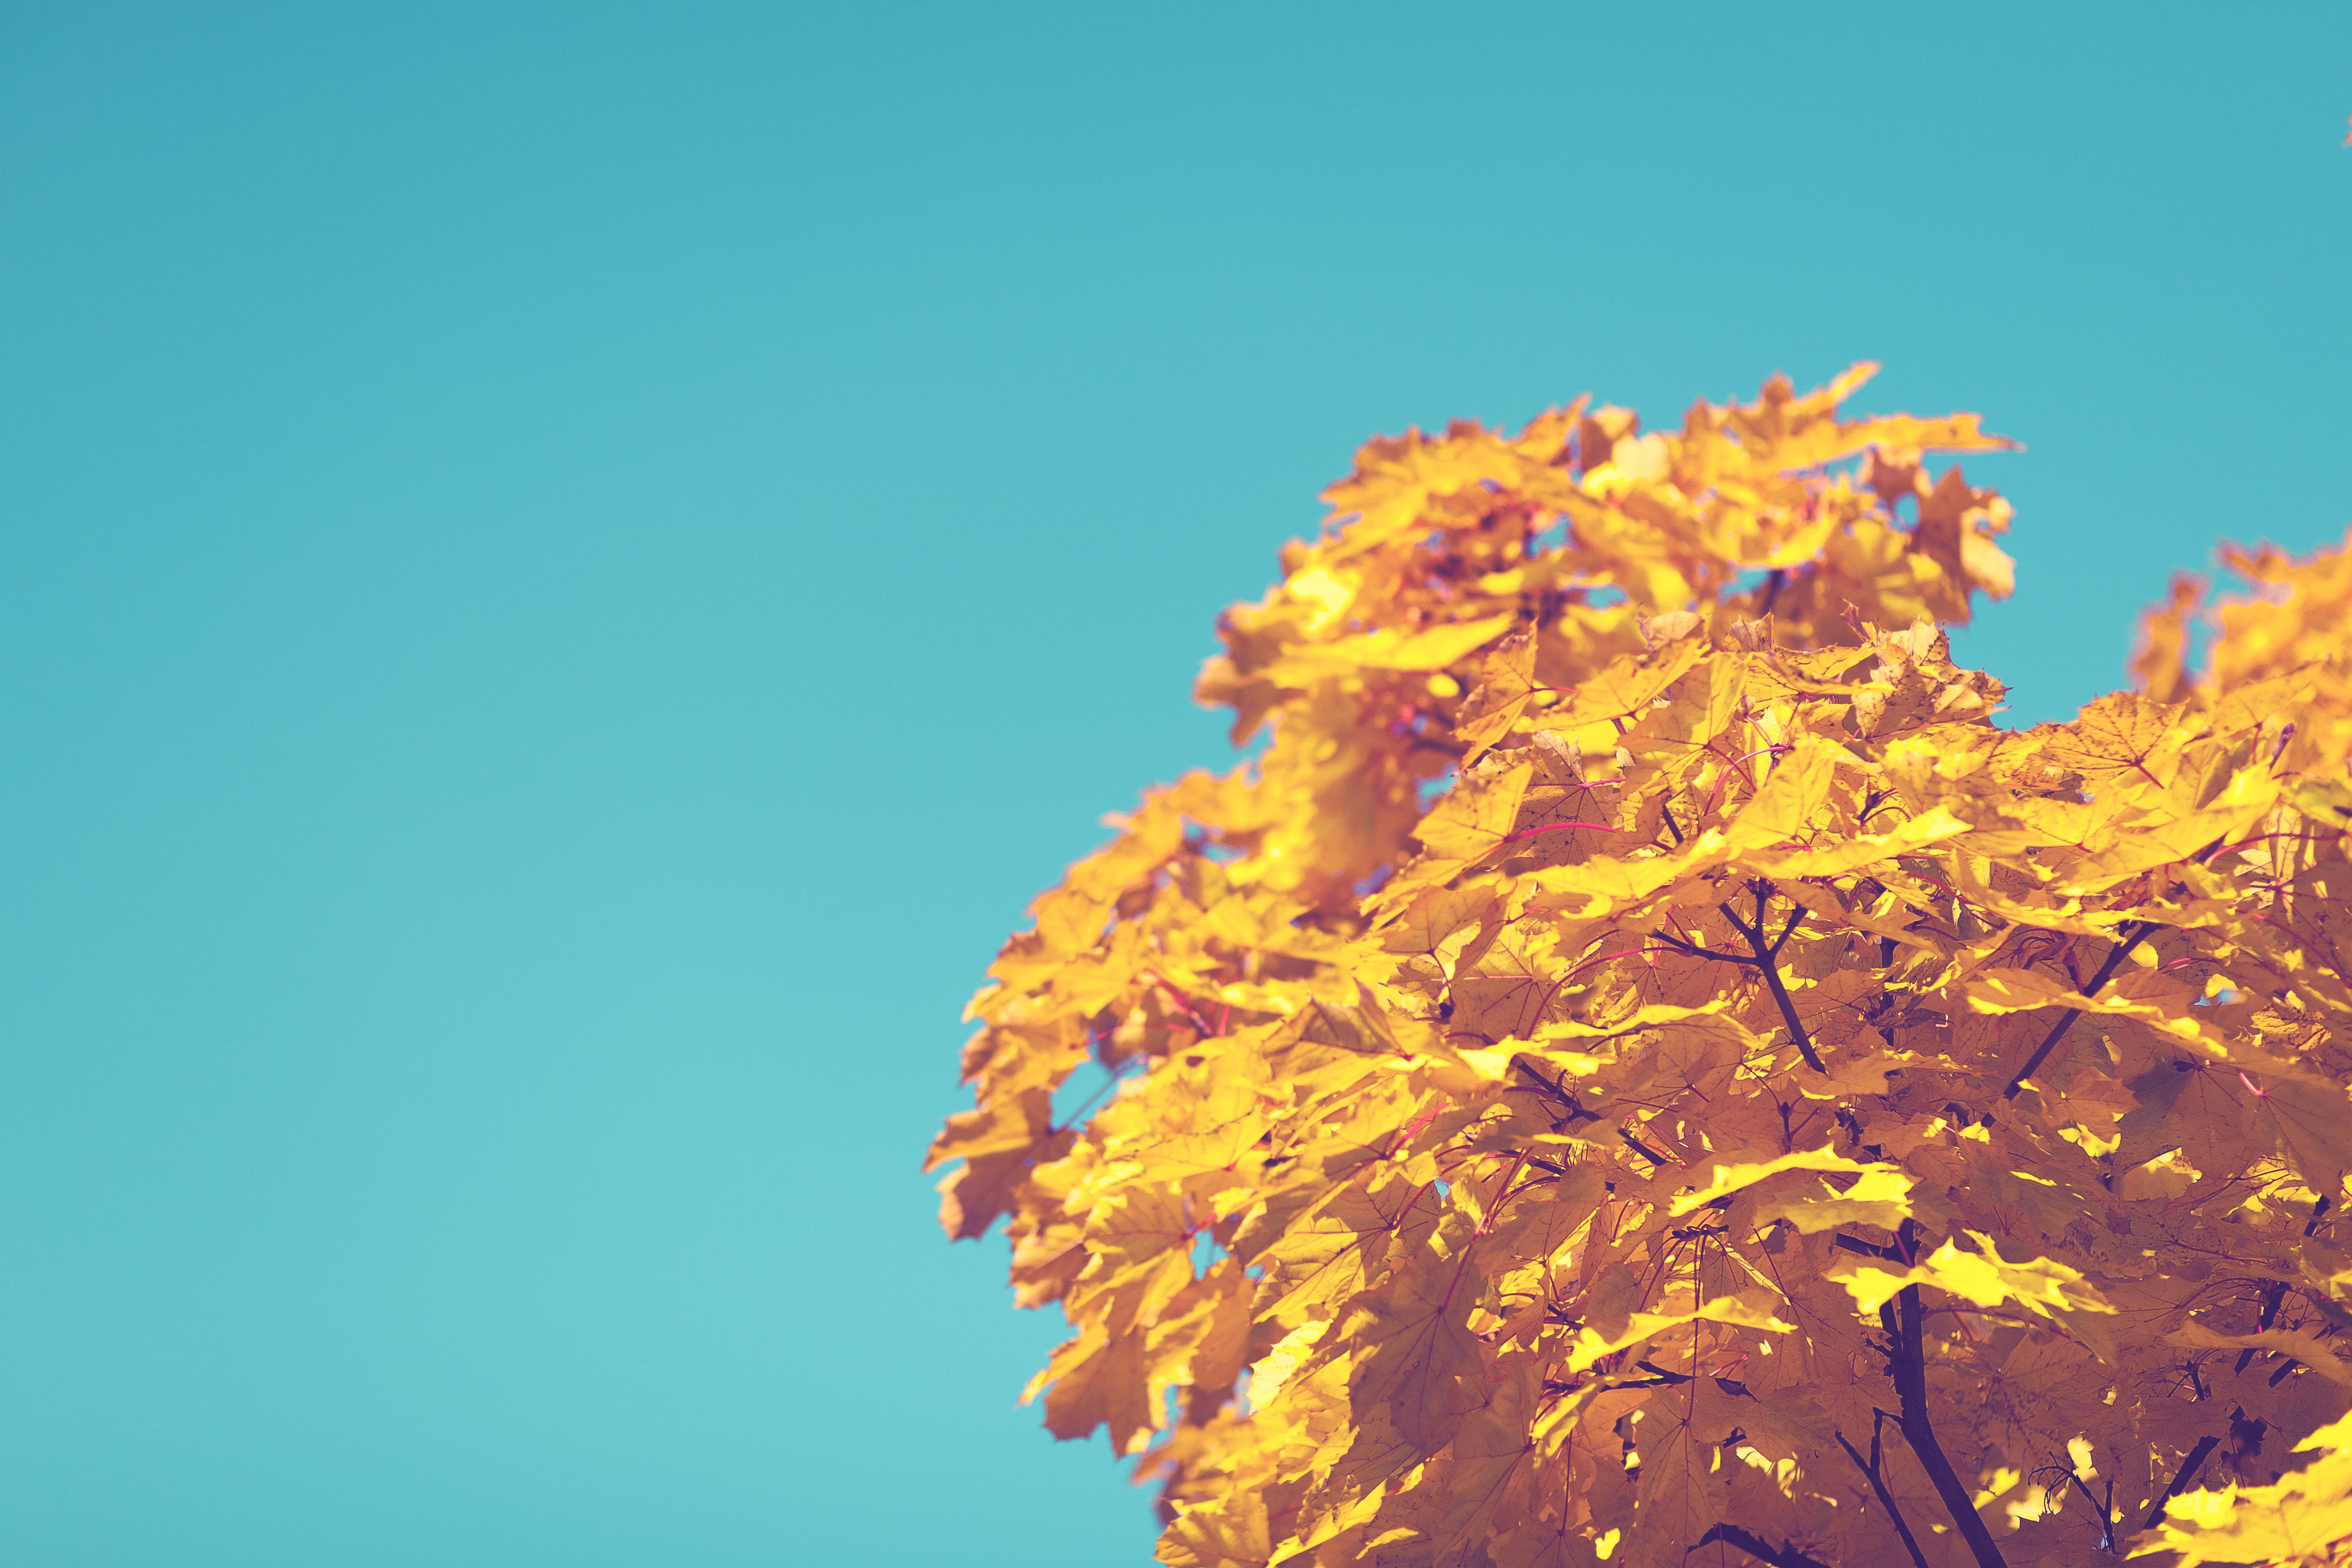 A tree with yellow leaves against a blue sky - Fall